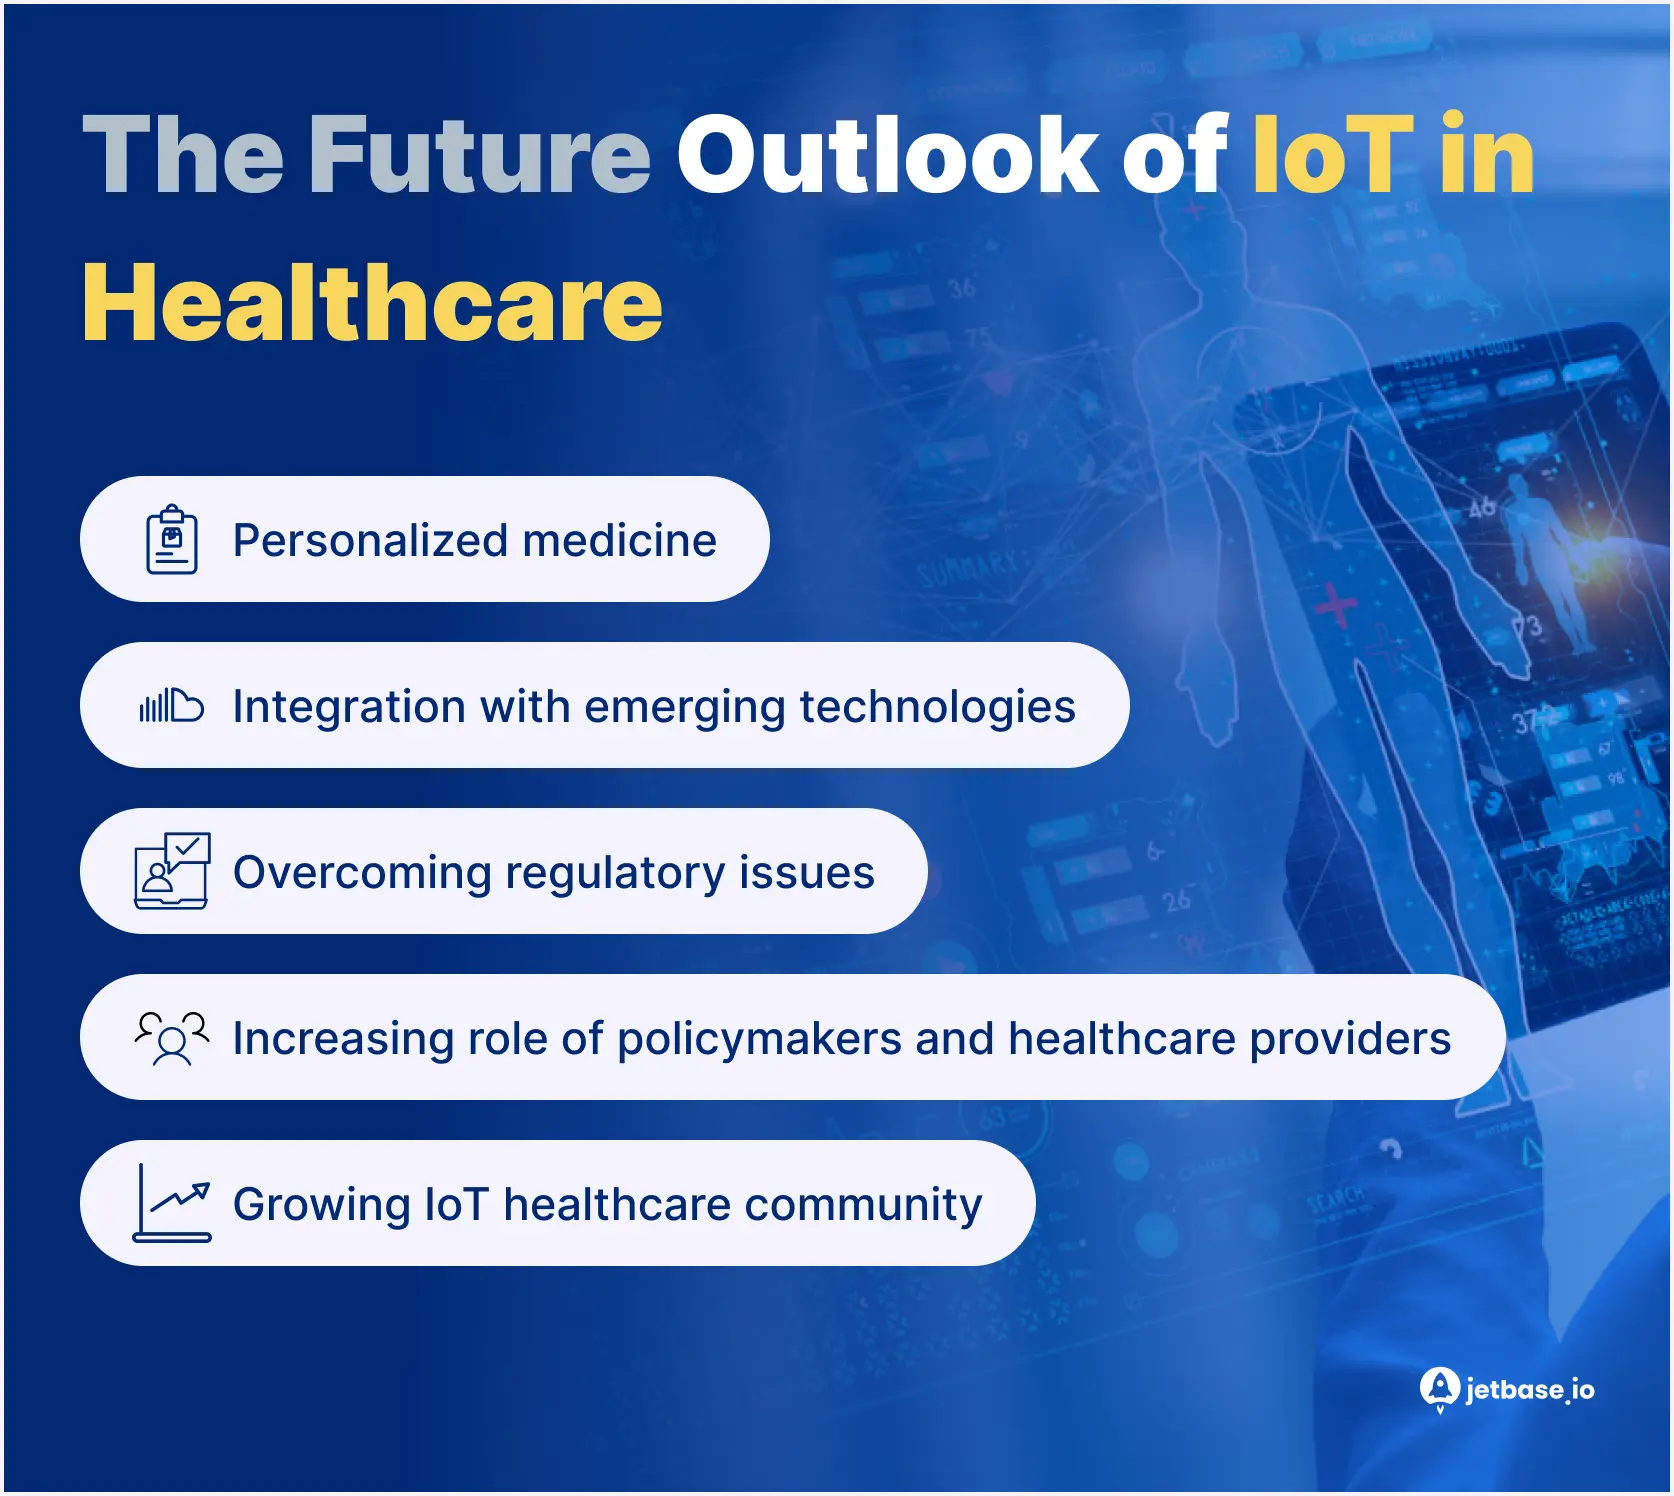 The Future Outlook of IoT in Healthcare.webp